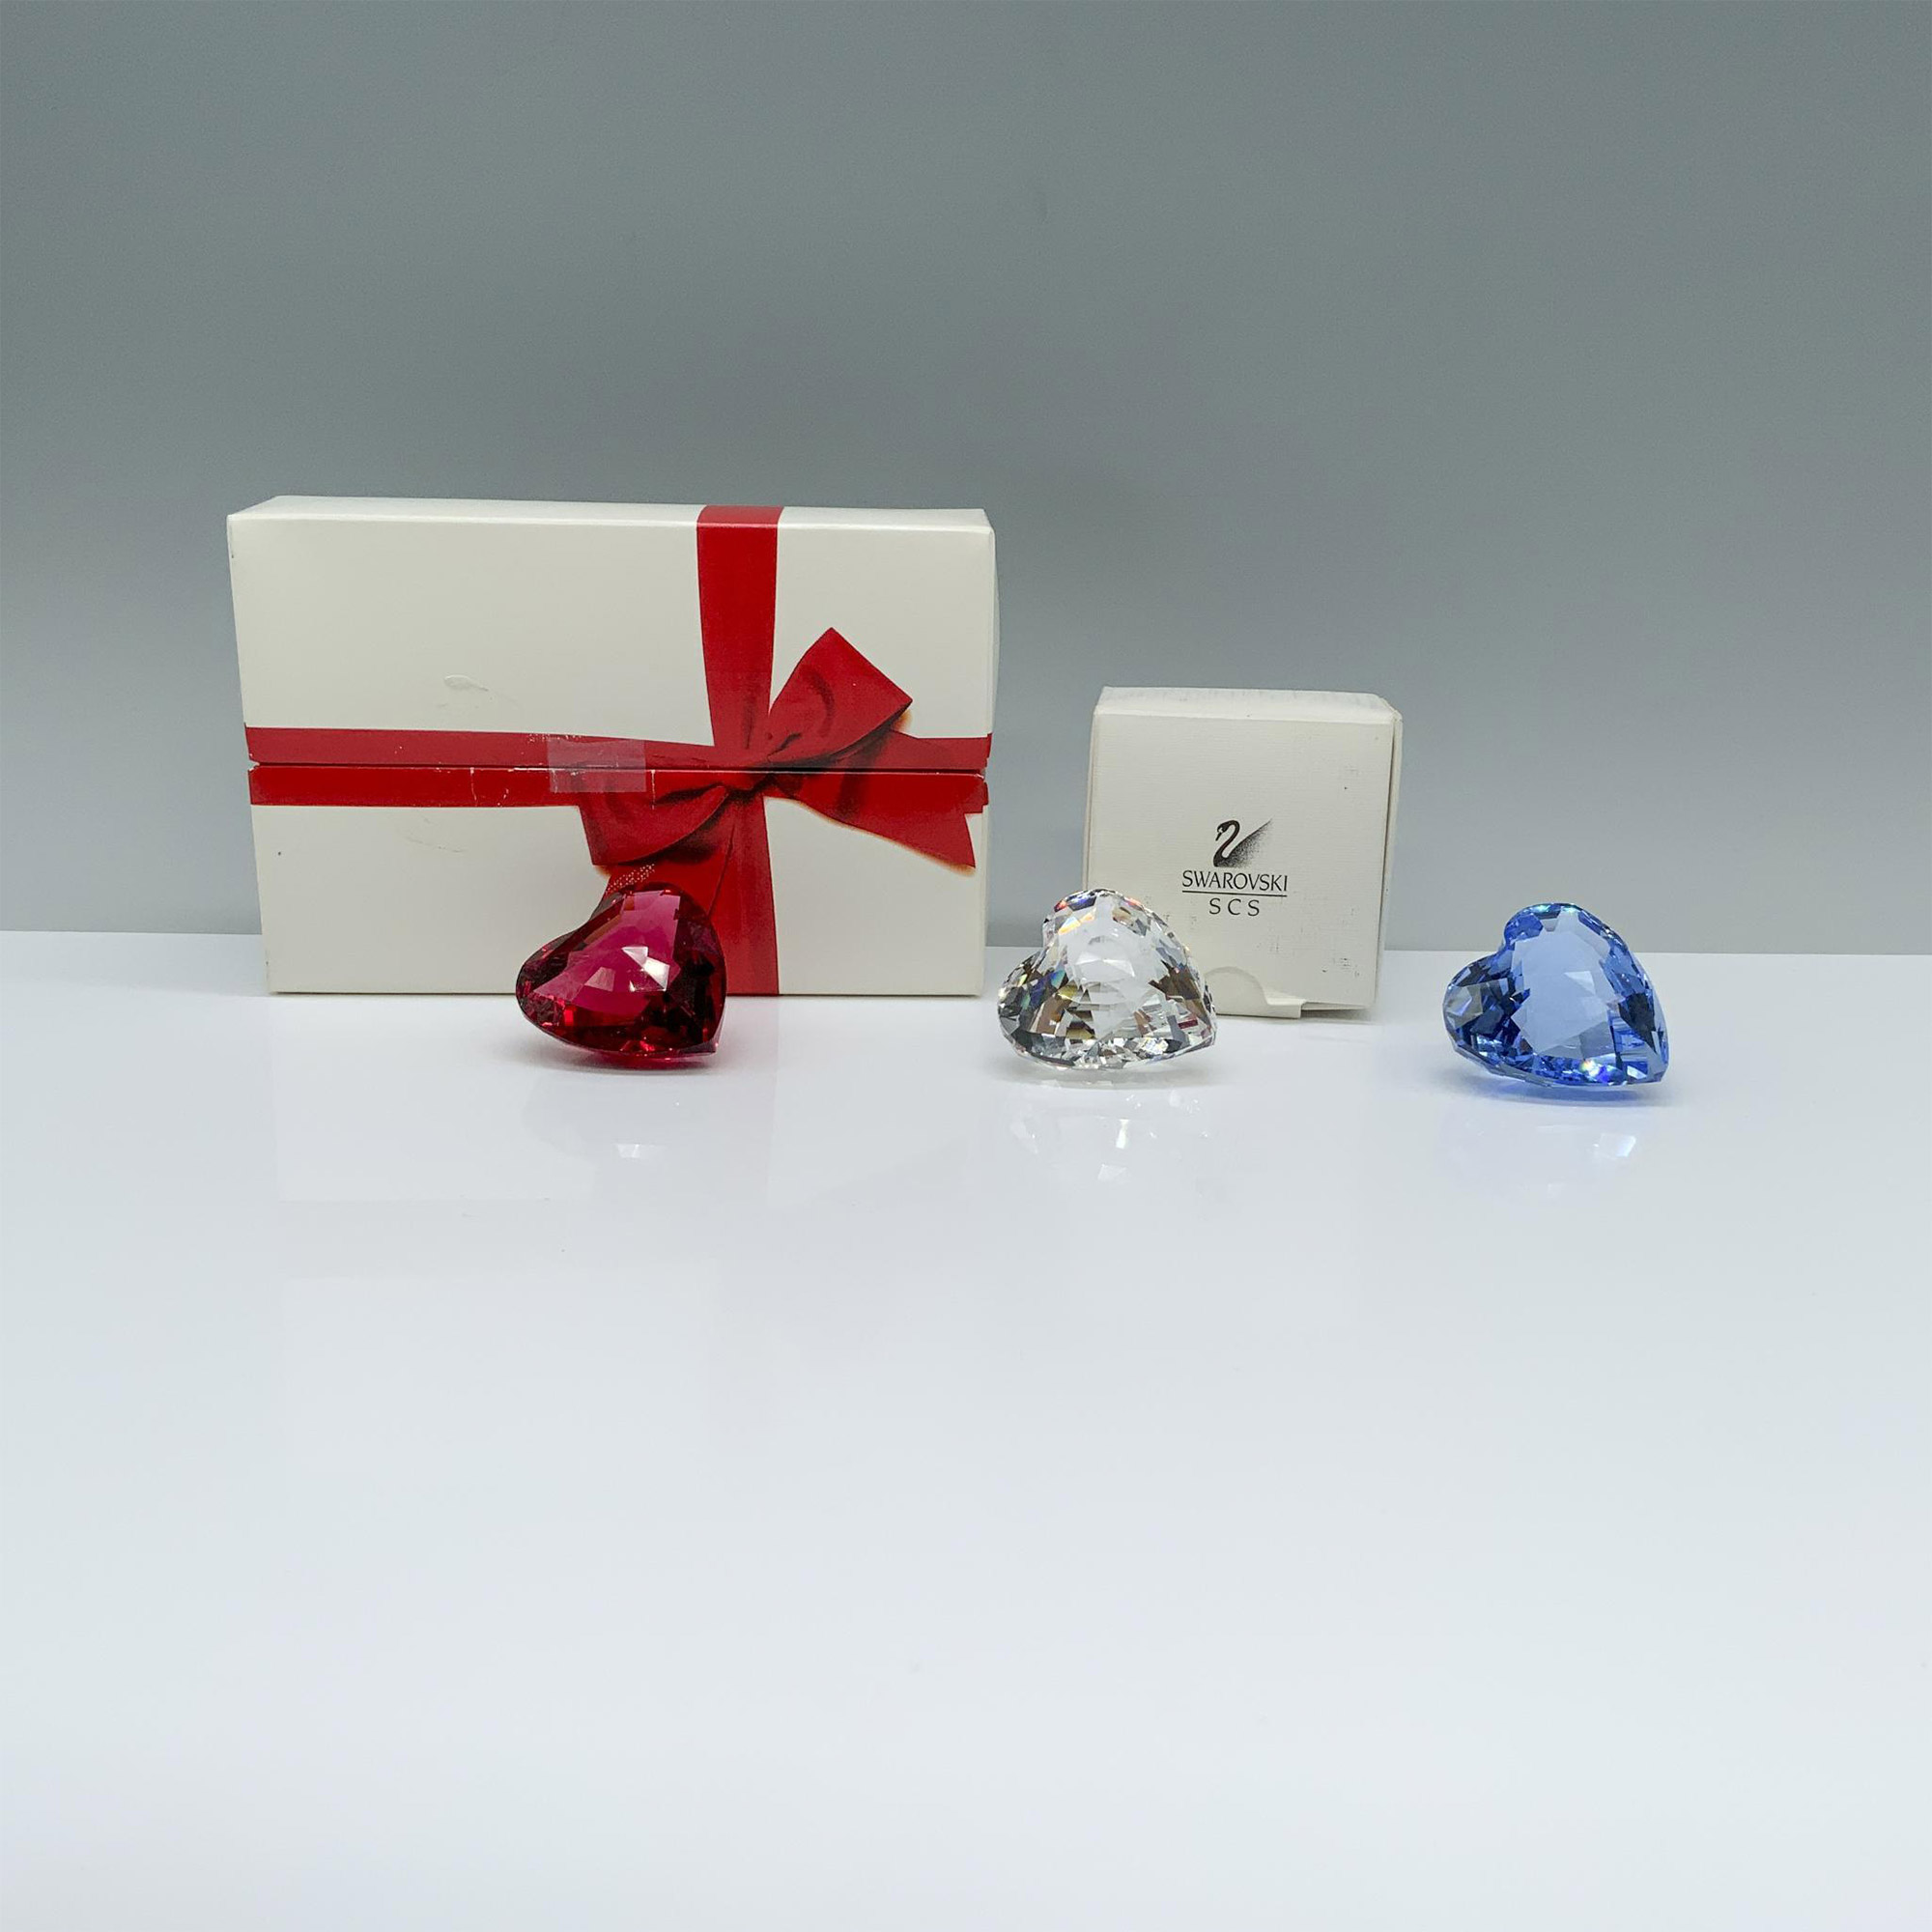 3pc Swarovski Crystal Figurines, Red, Blue, and Clear Heart - Image 4 of 4